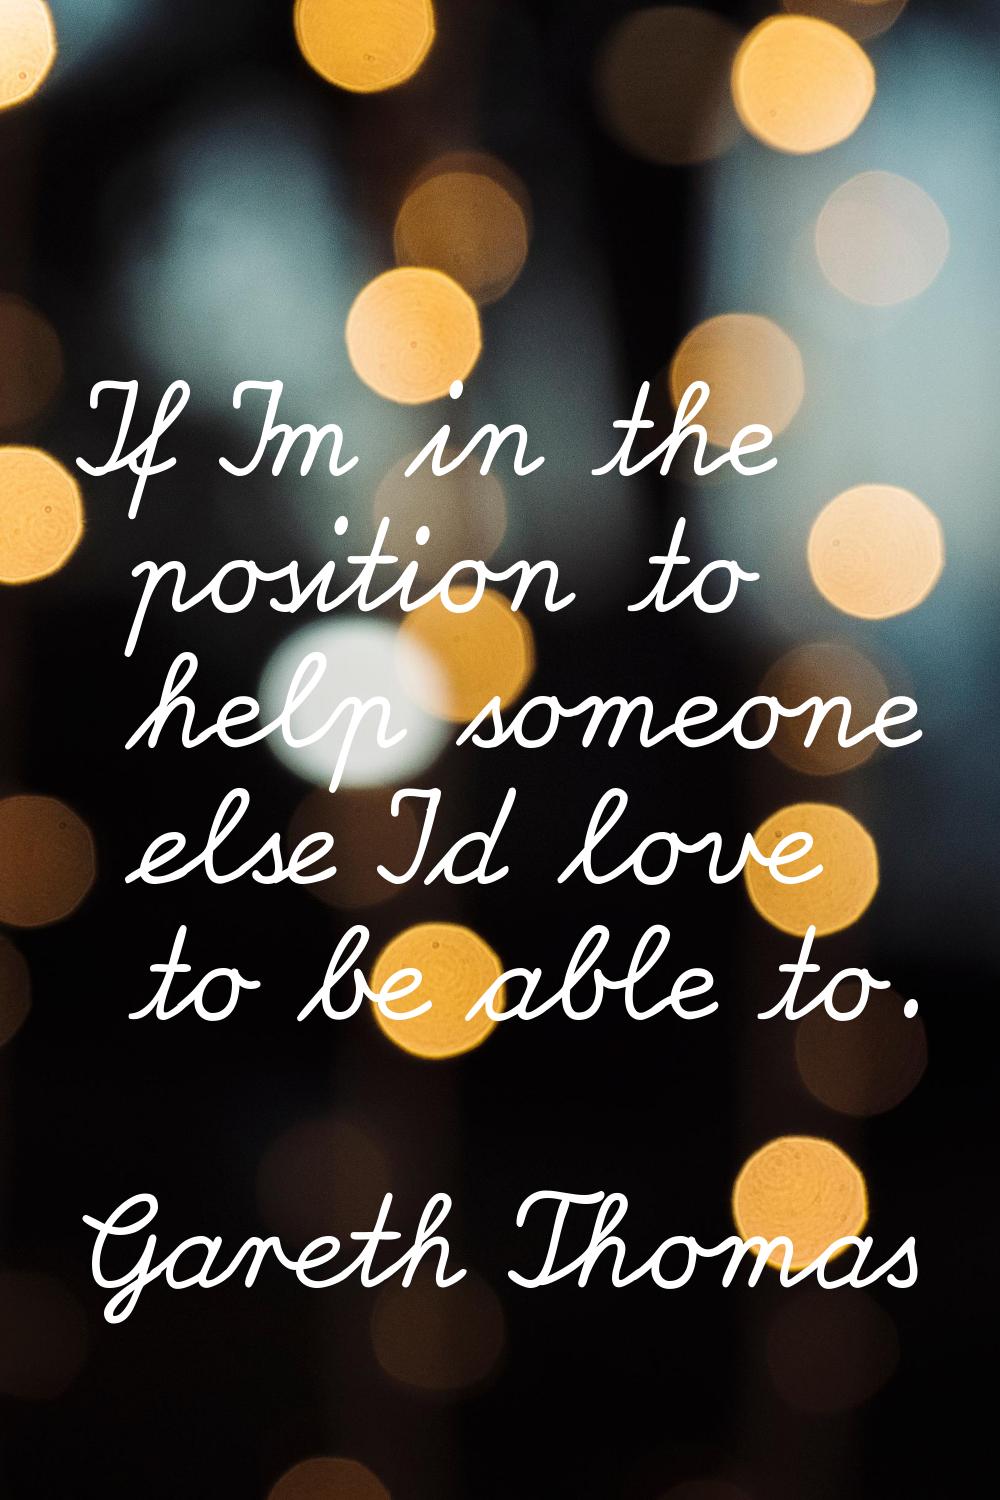 If I'm in the position to help someone else I'd love to be able to.